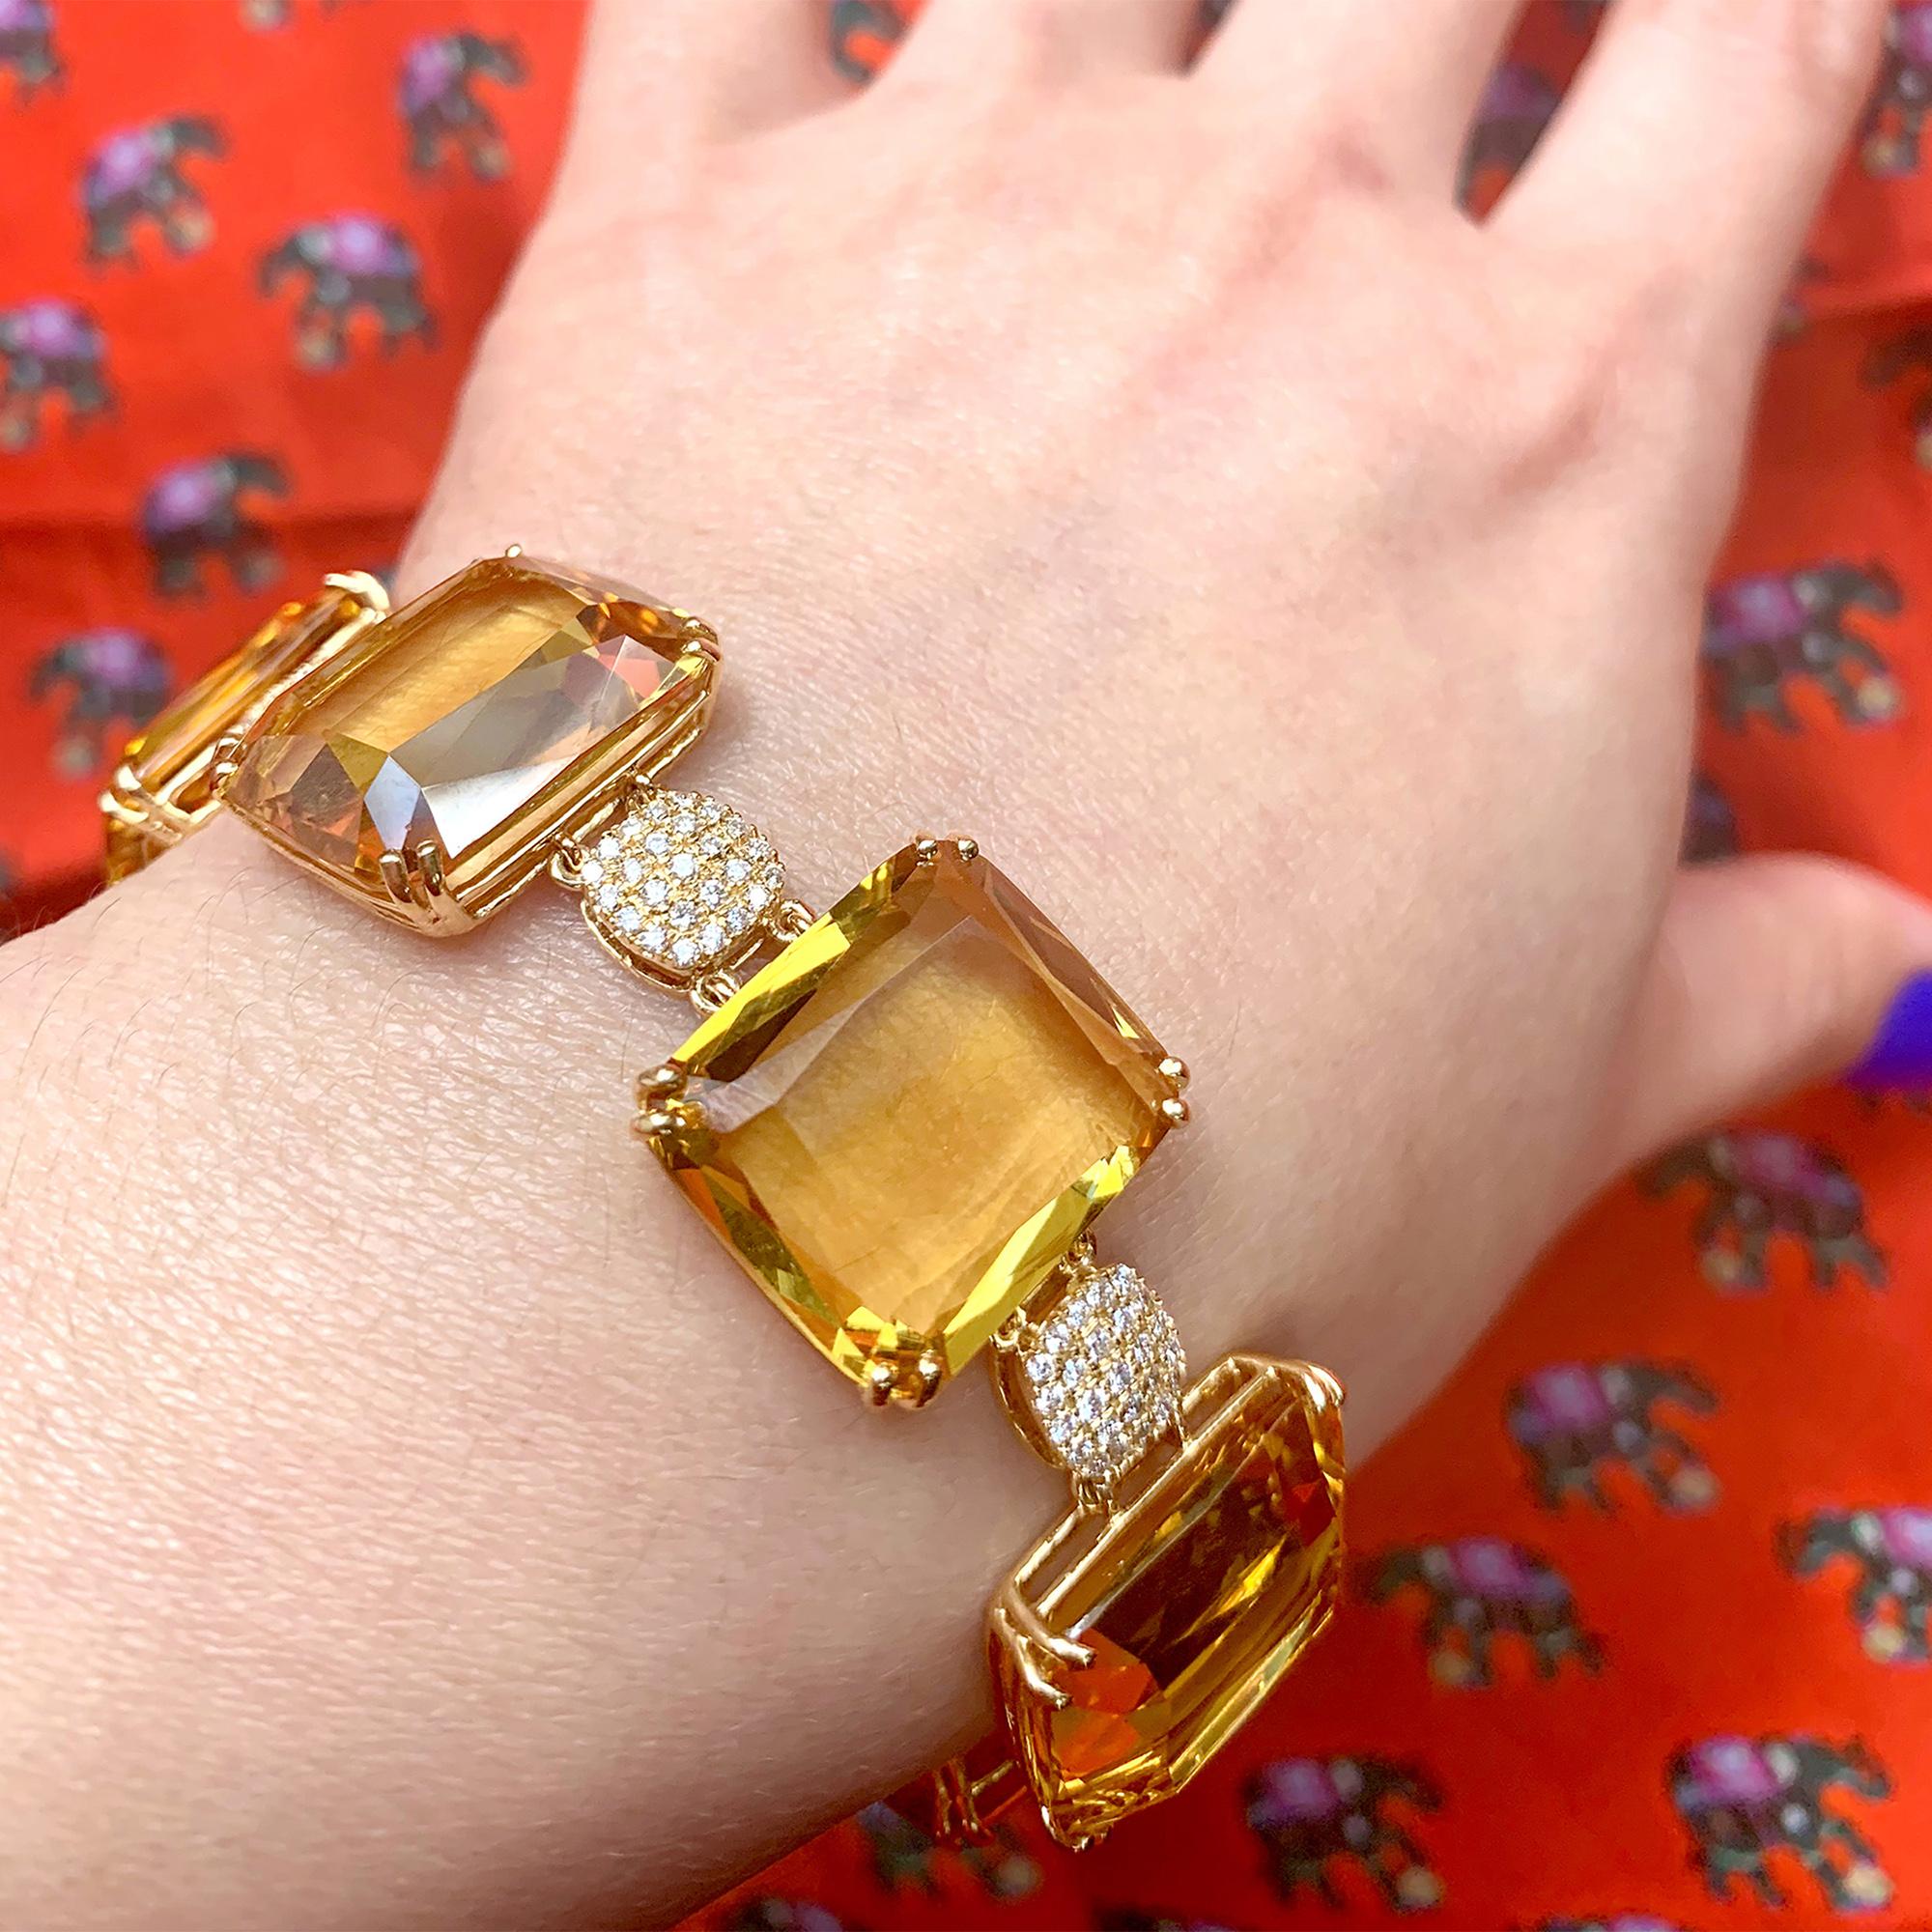 Citrine Faceted Flat Cushion Bracelet with Diamonds in 18K Yellow Gold, from 'Gossip' Collection

Stone Size: 19 x 16 mm

Diamonds: G-H / VS, Approx. Wt.: 1.75 Carats

(The size can be adjusted as per request)